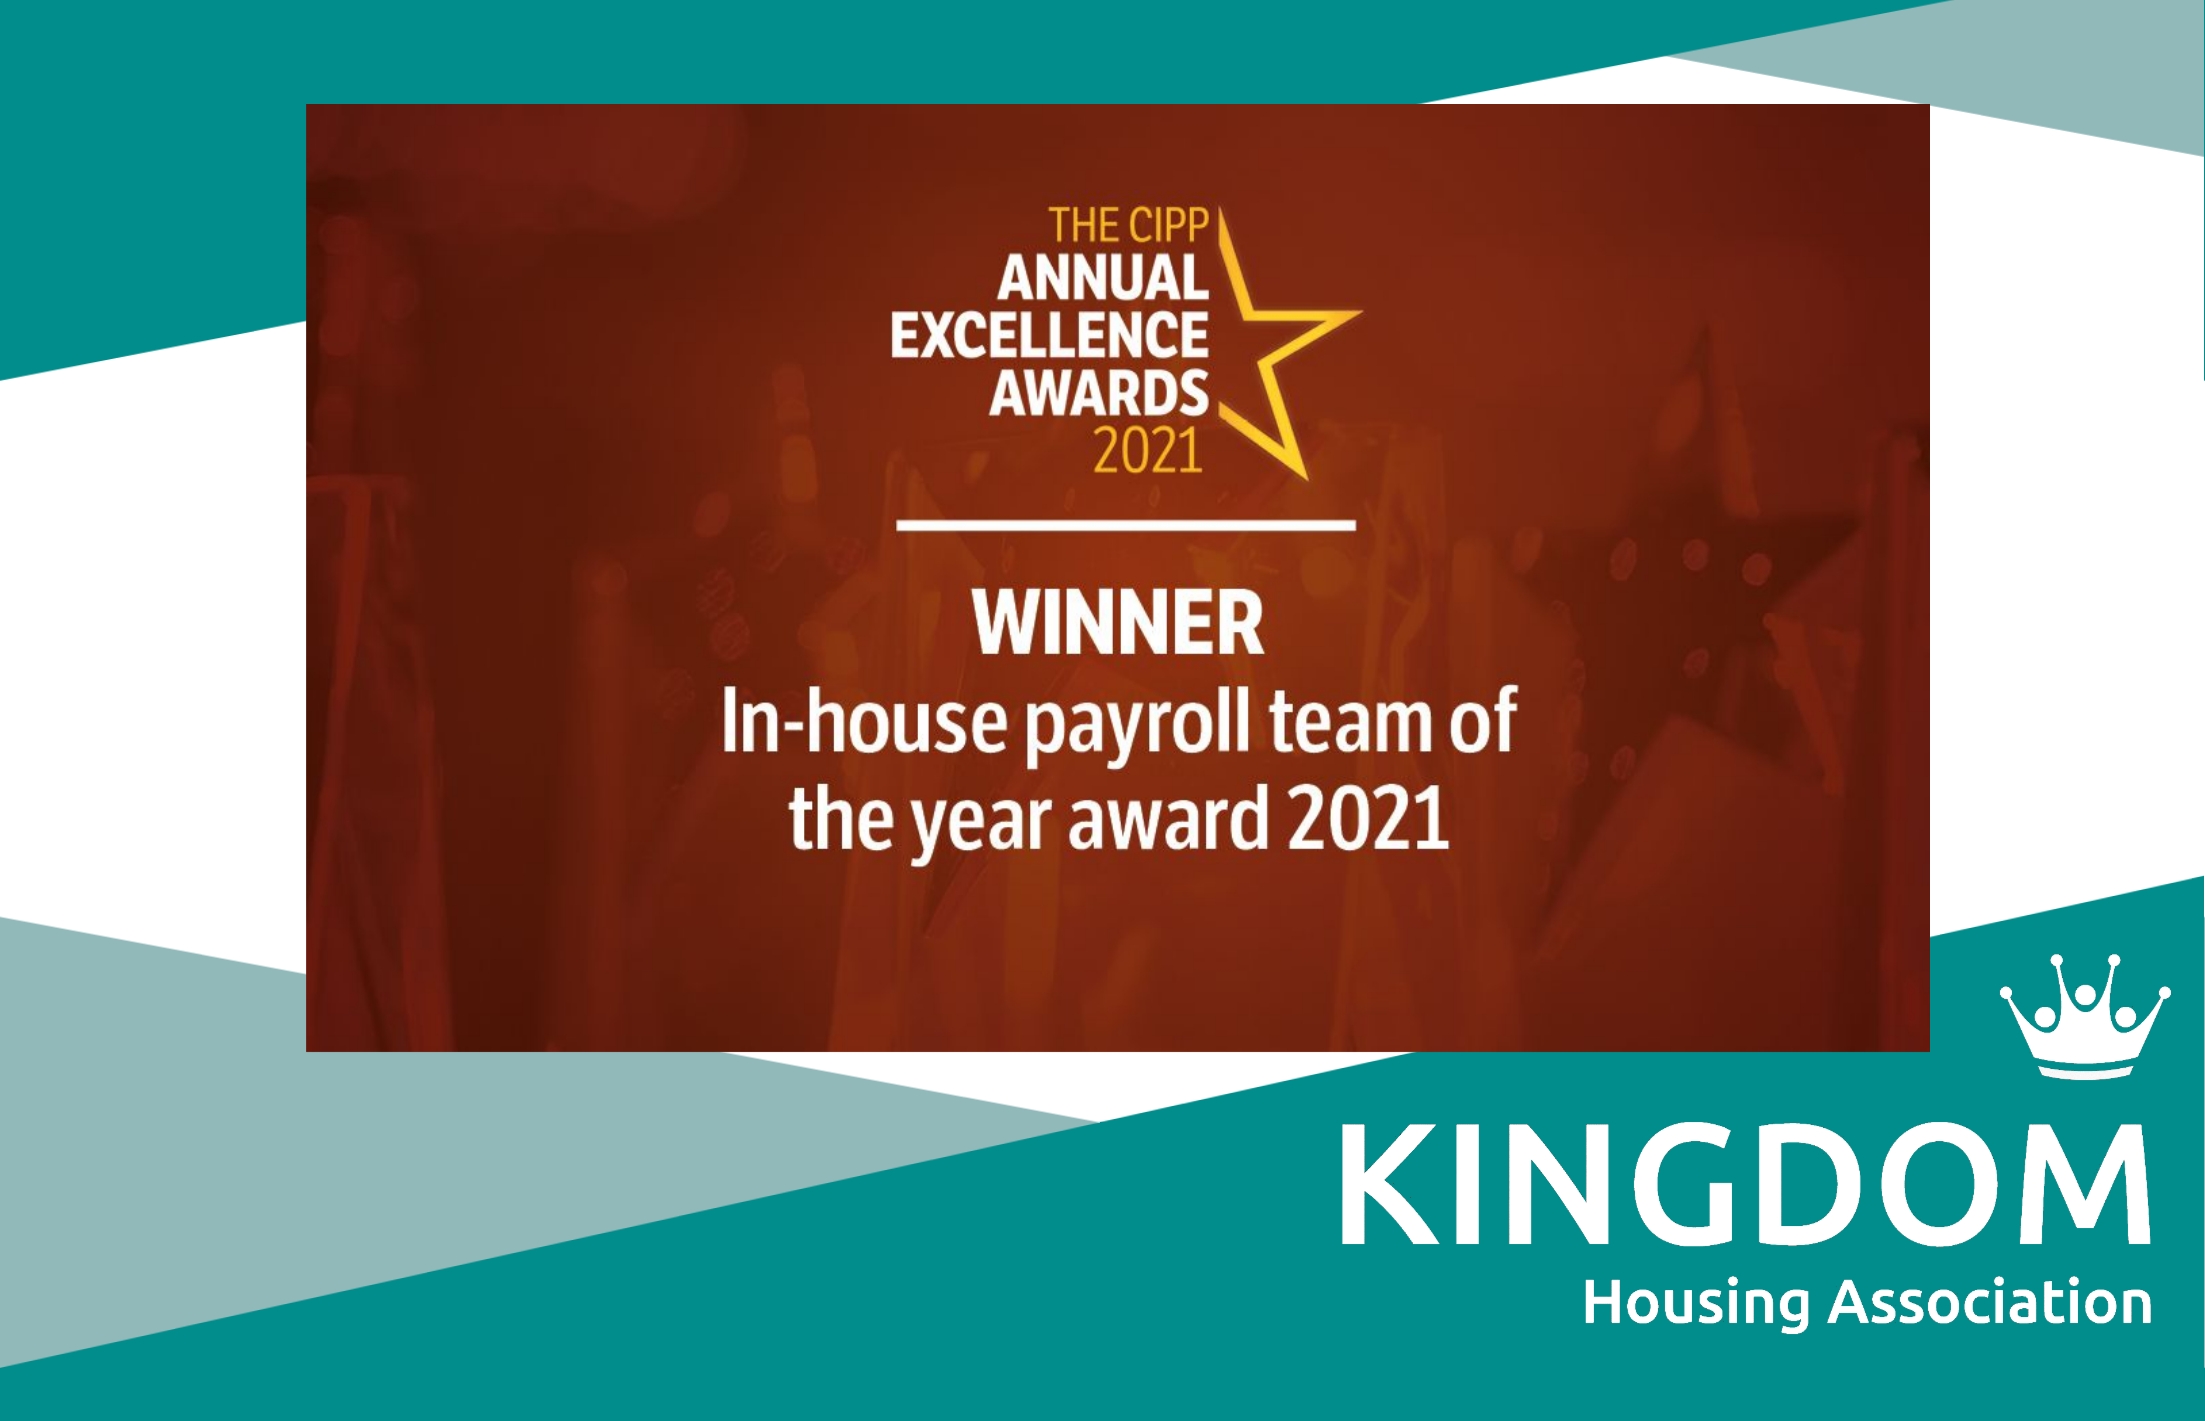 Kingdom Housing Association’s payroll team win at National Excellence Awards